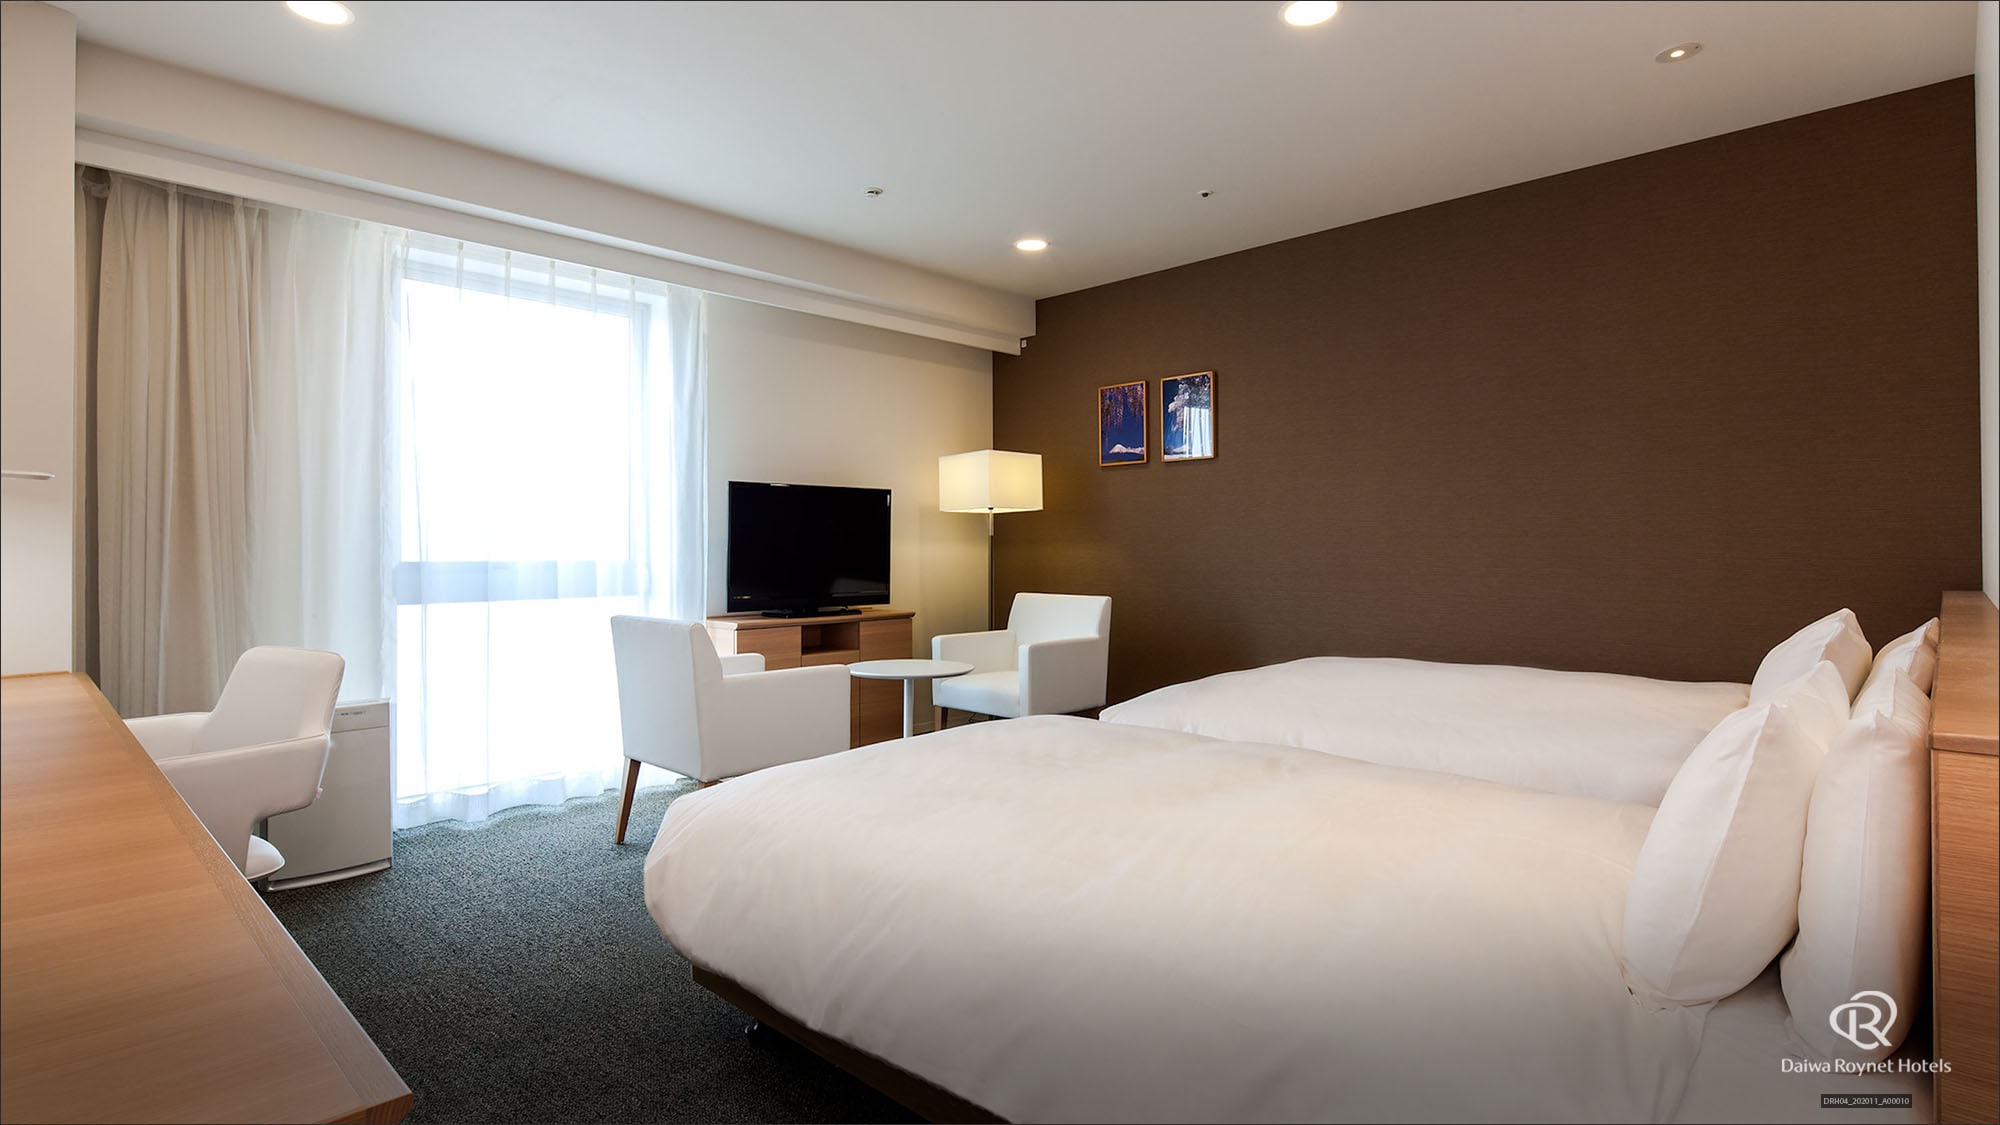 Standard twin room Room area: 36㎡ Bed size 154cm + 122cm